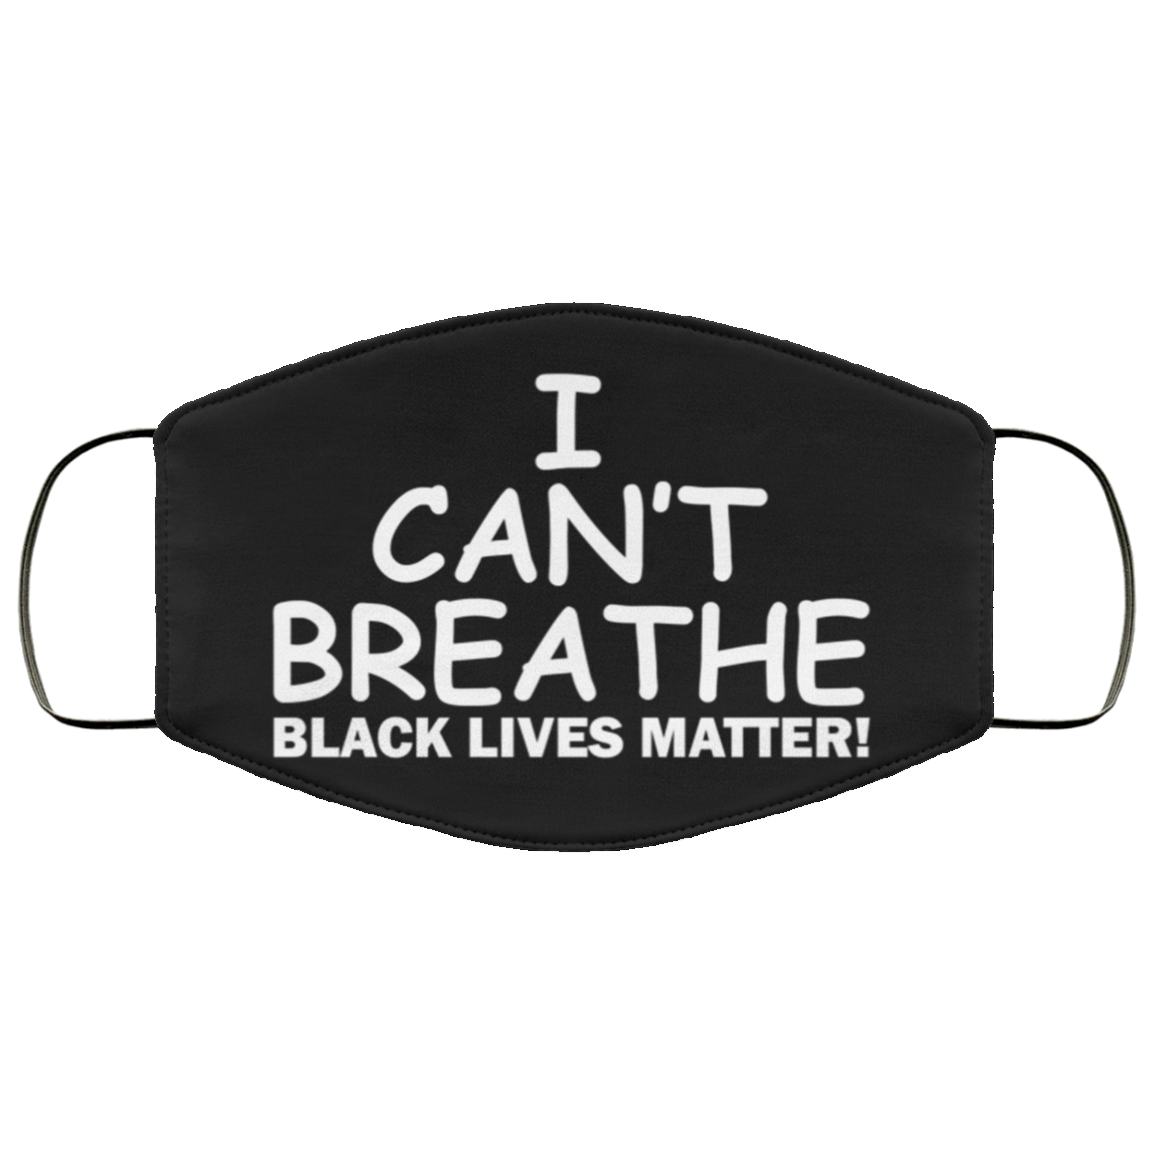 I CanT Breathe Blm Black Lives Matter Men Women Kids Face Cover Windproof Mouth Cover Breathable Cycling Dust Covers 